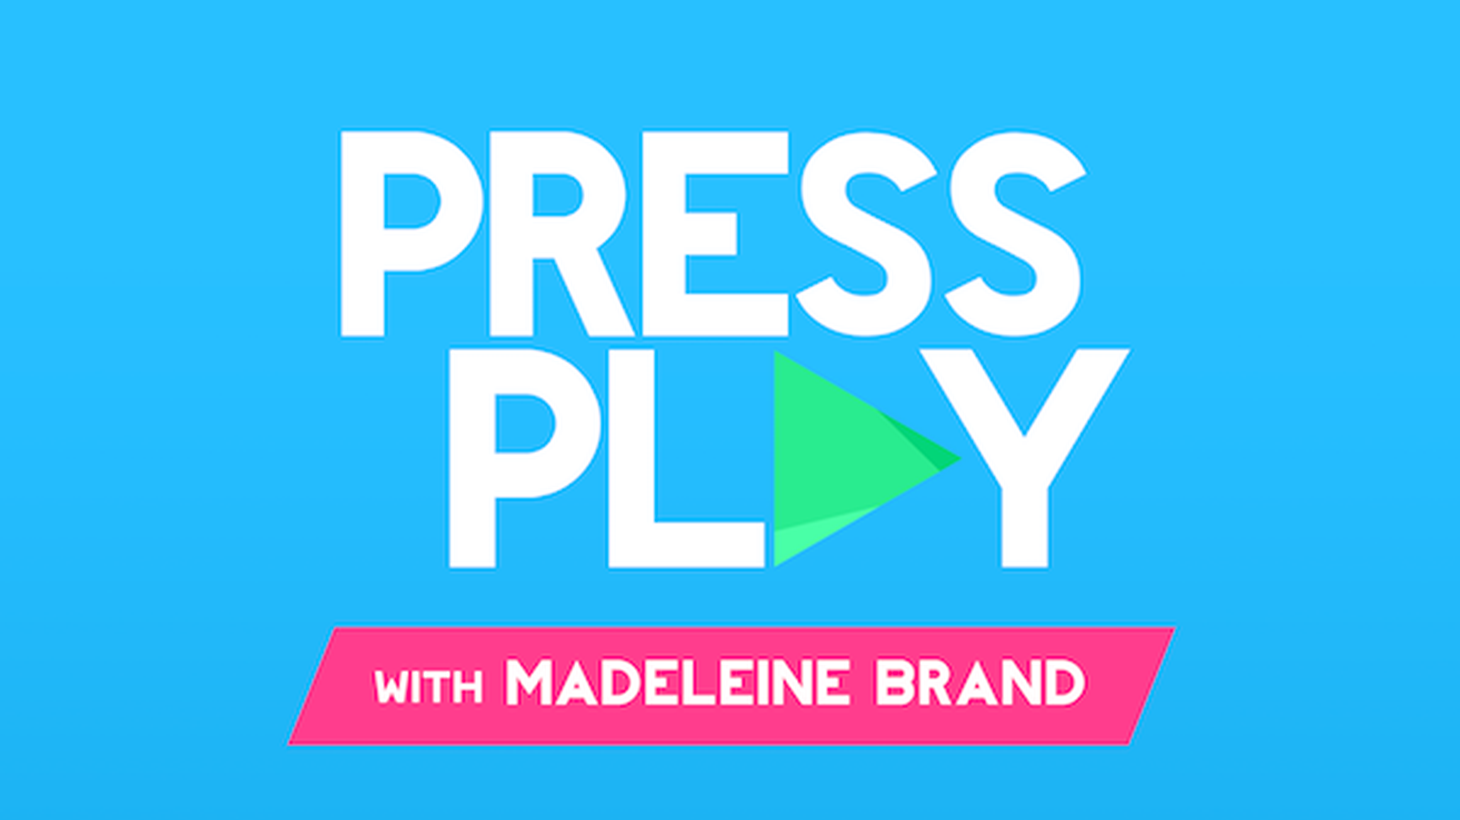 Today on Press Play, we take a look at how the brutality of ISIS is driving President’s Obama’s foreign policy. Plus, how riding the rails are inspiring the first crop of Amtrak’s writer residency program.